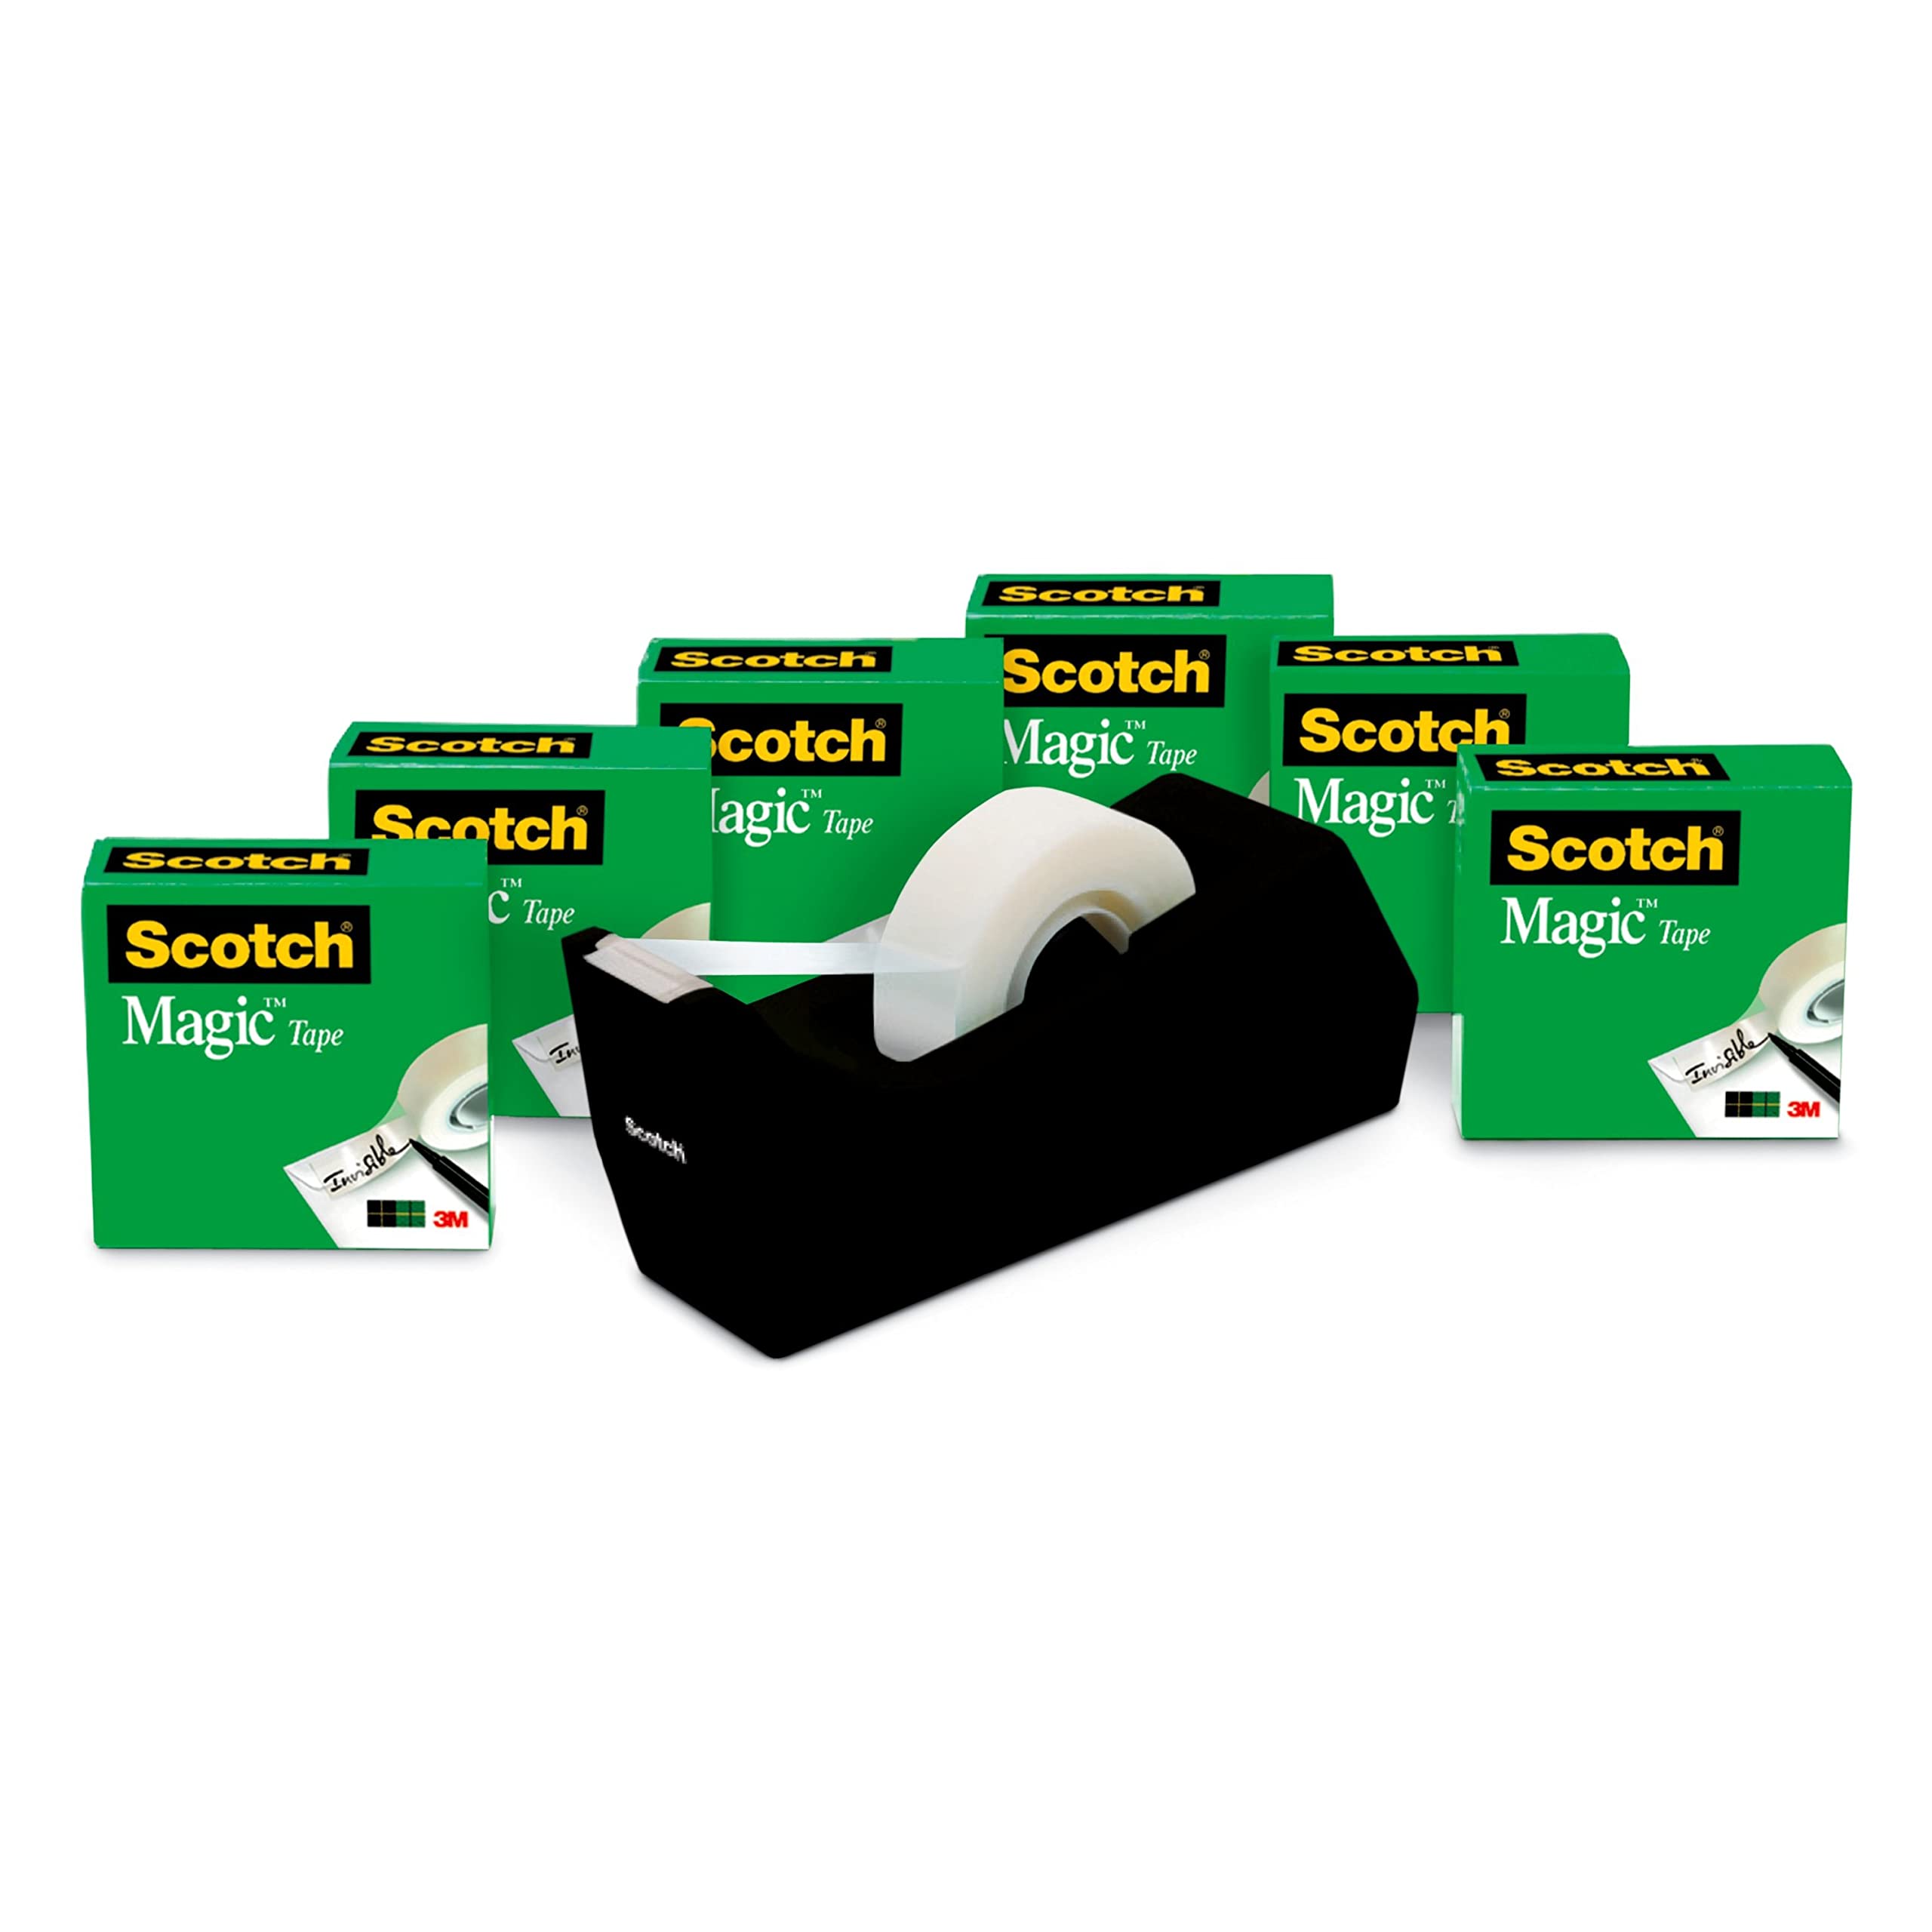 Scotch Magic Tape, Invisible, Back to School Supplies and College Essentials for Students and Teachers, 6 Tape Rolls With Dispensers, 3/4 x 1000 Inches